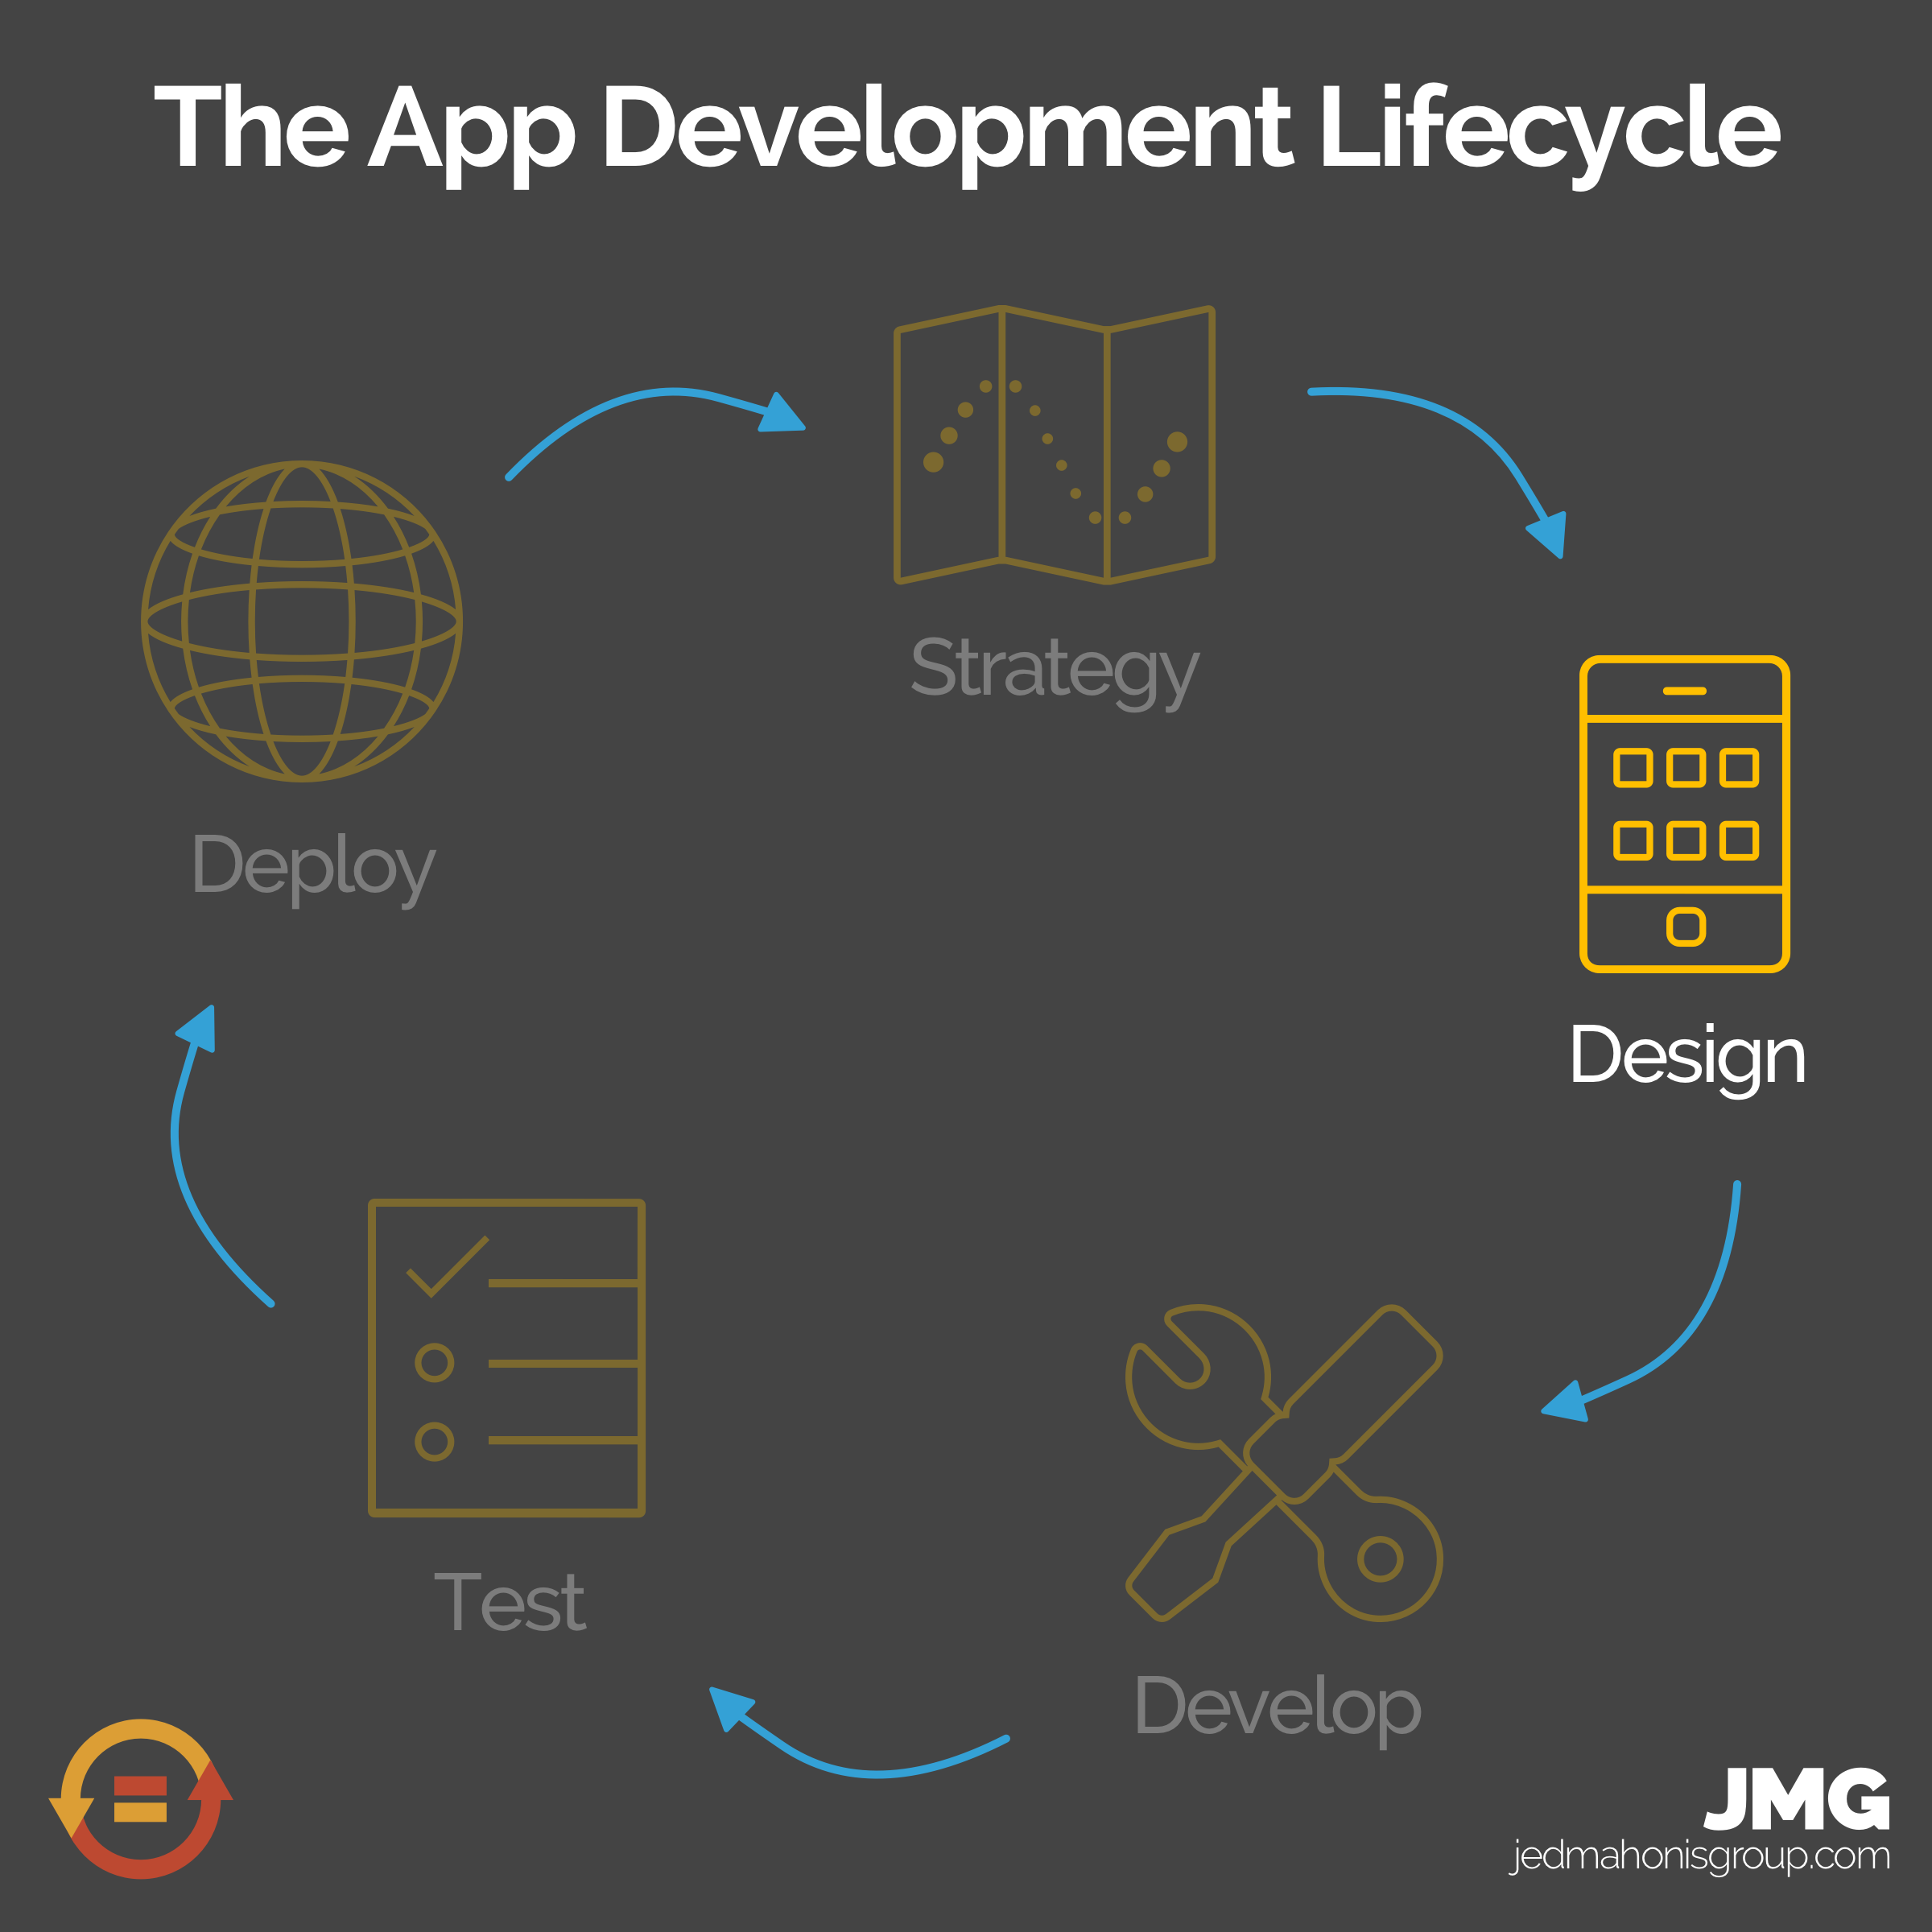 The 5 Stages of the App Development Lifecycle